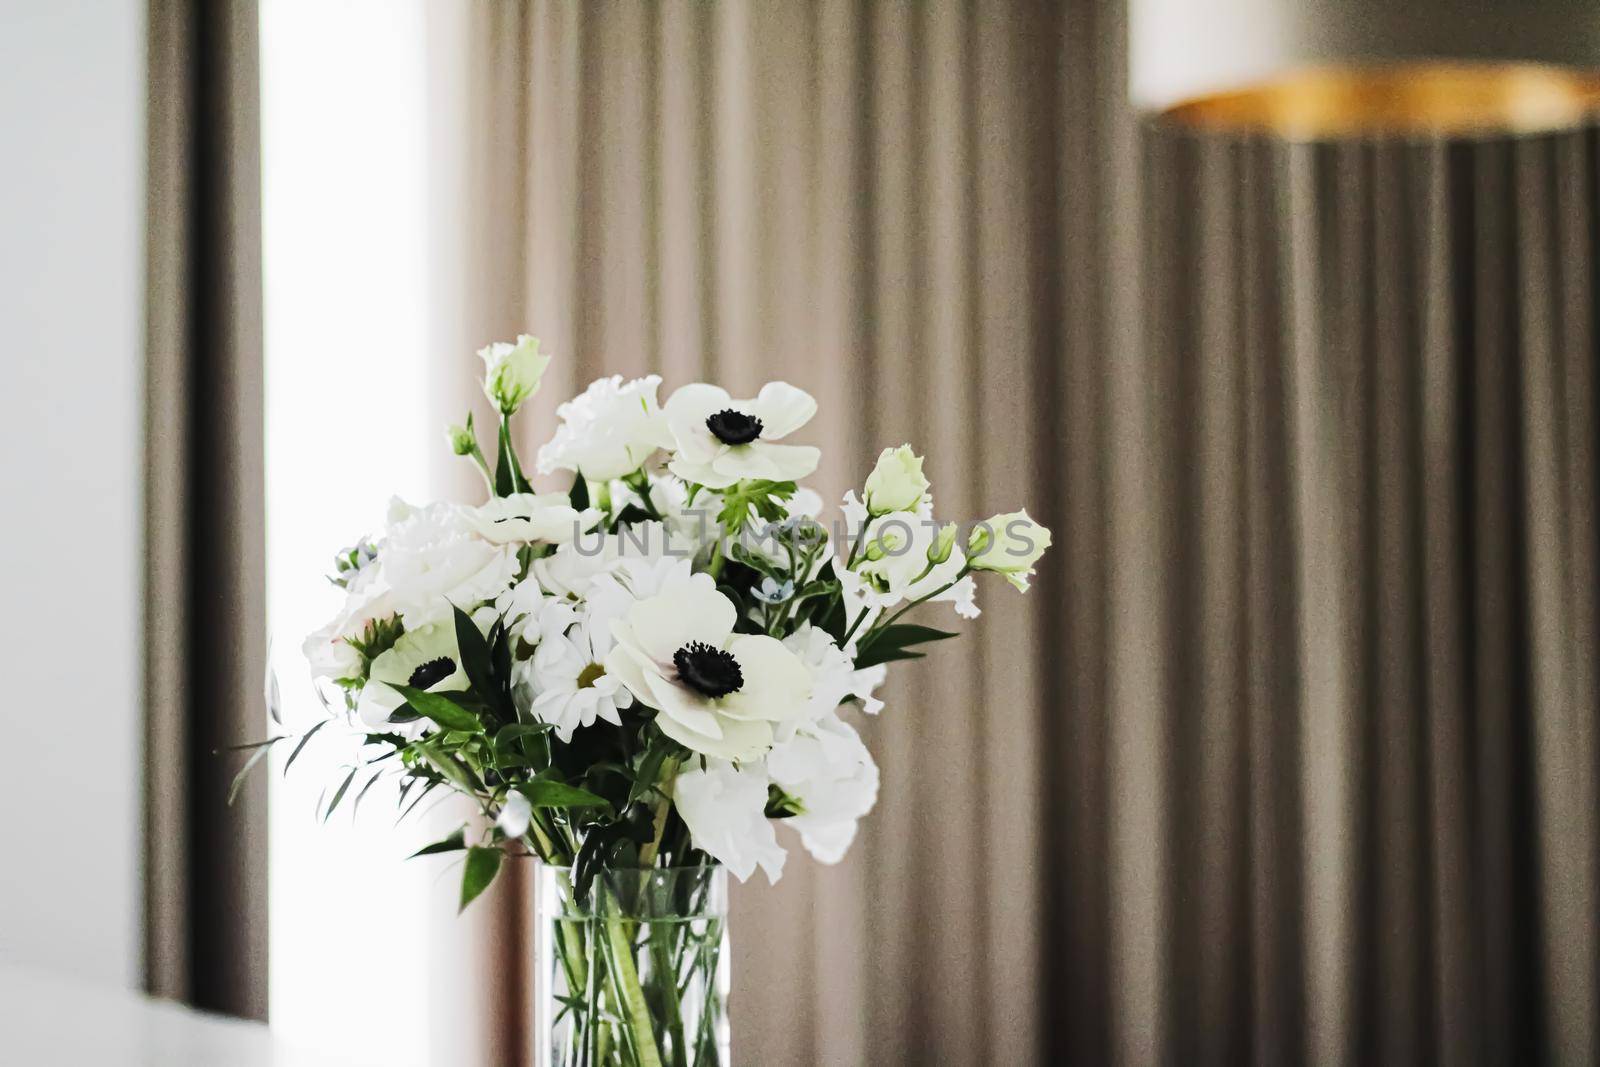 Bouquet of flowers in vase and home decor details, luxury interior design by Anneleven